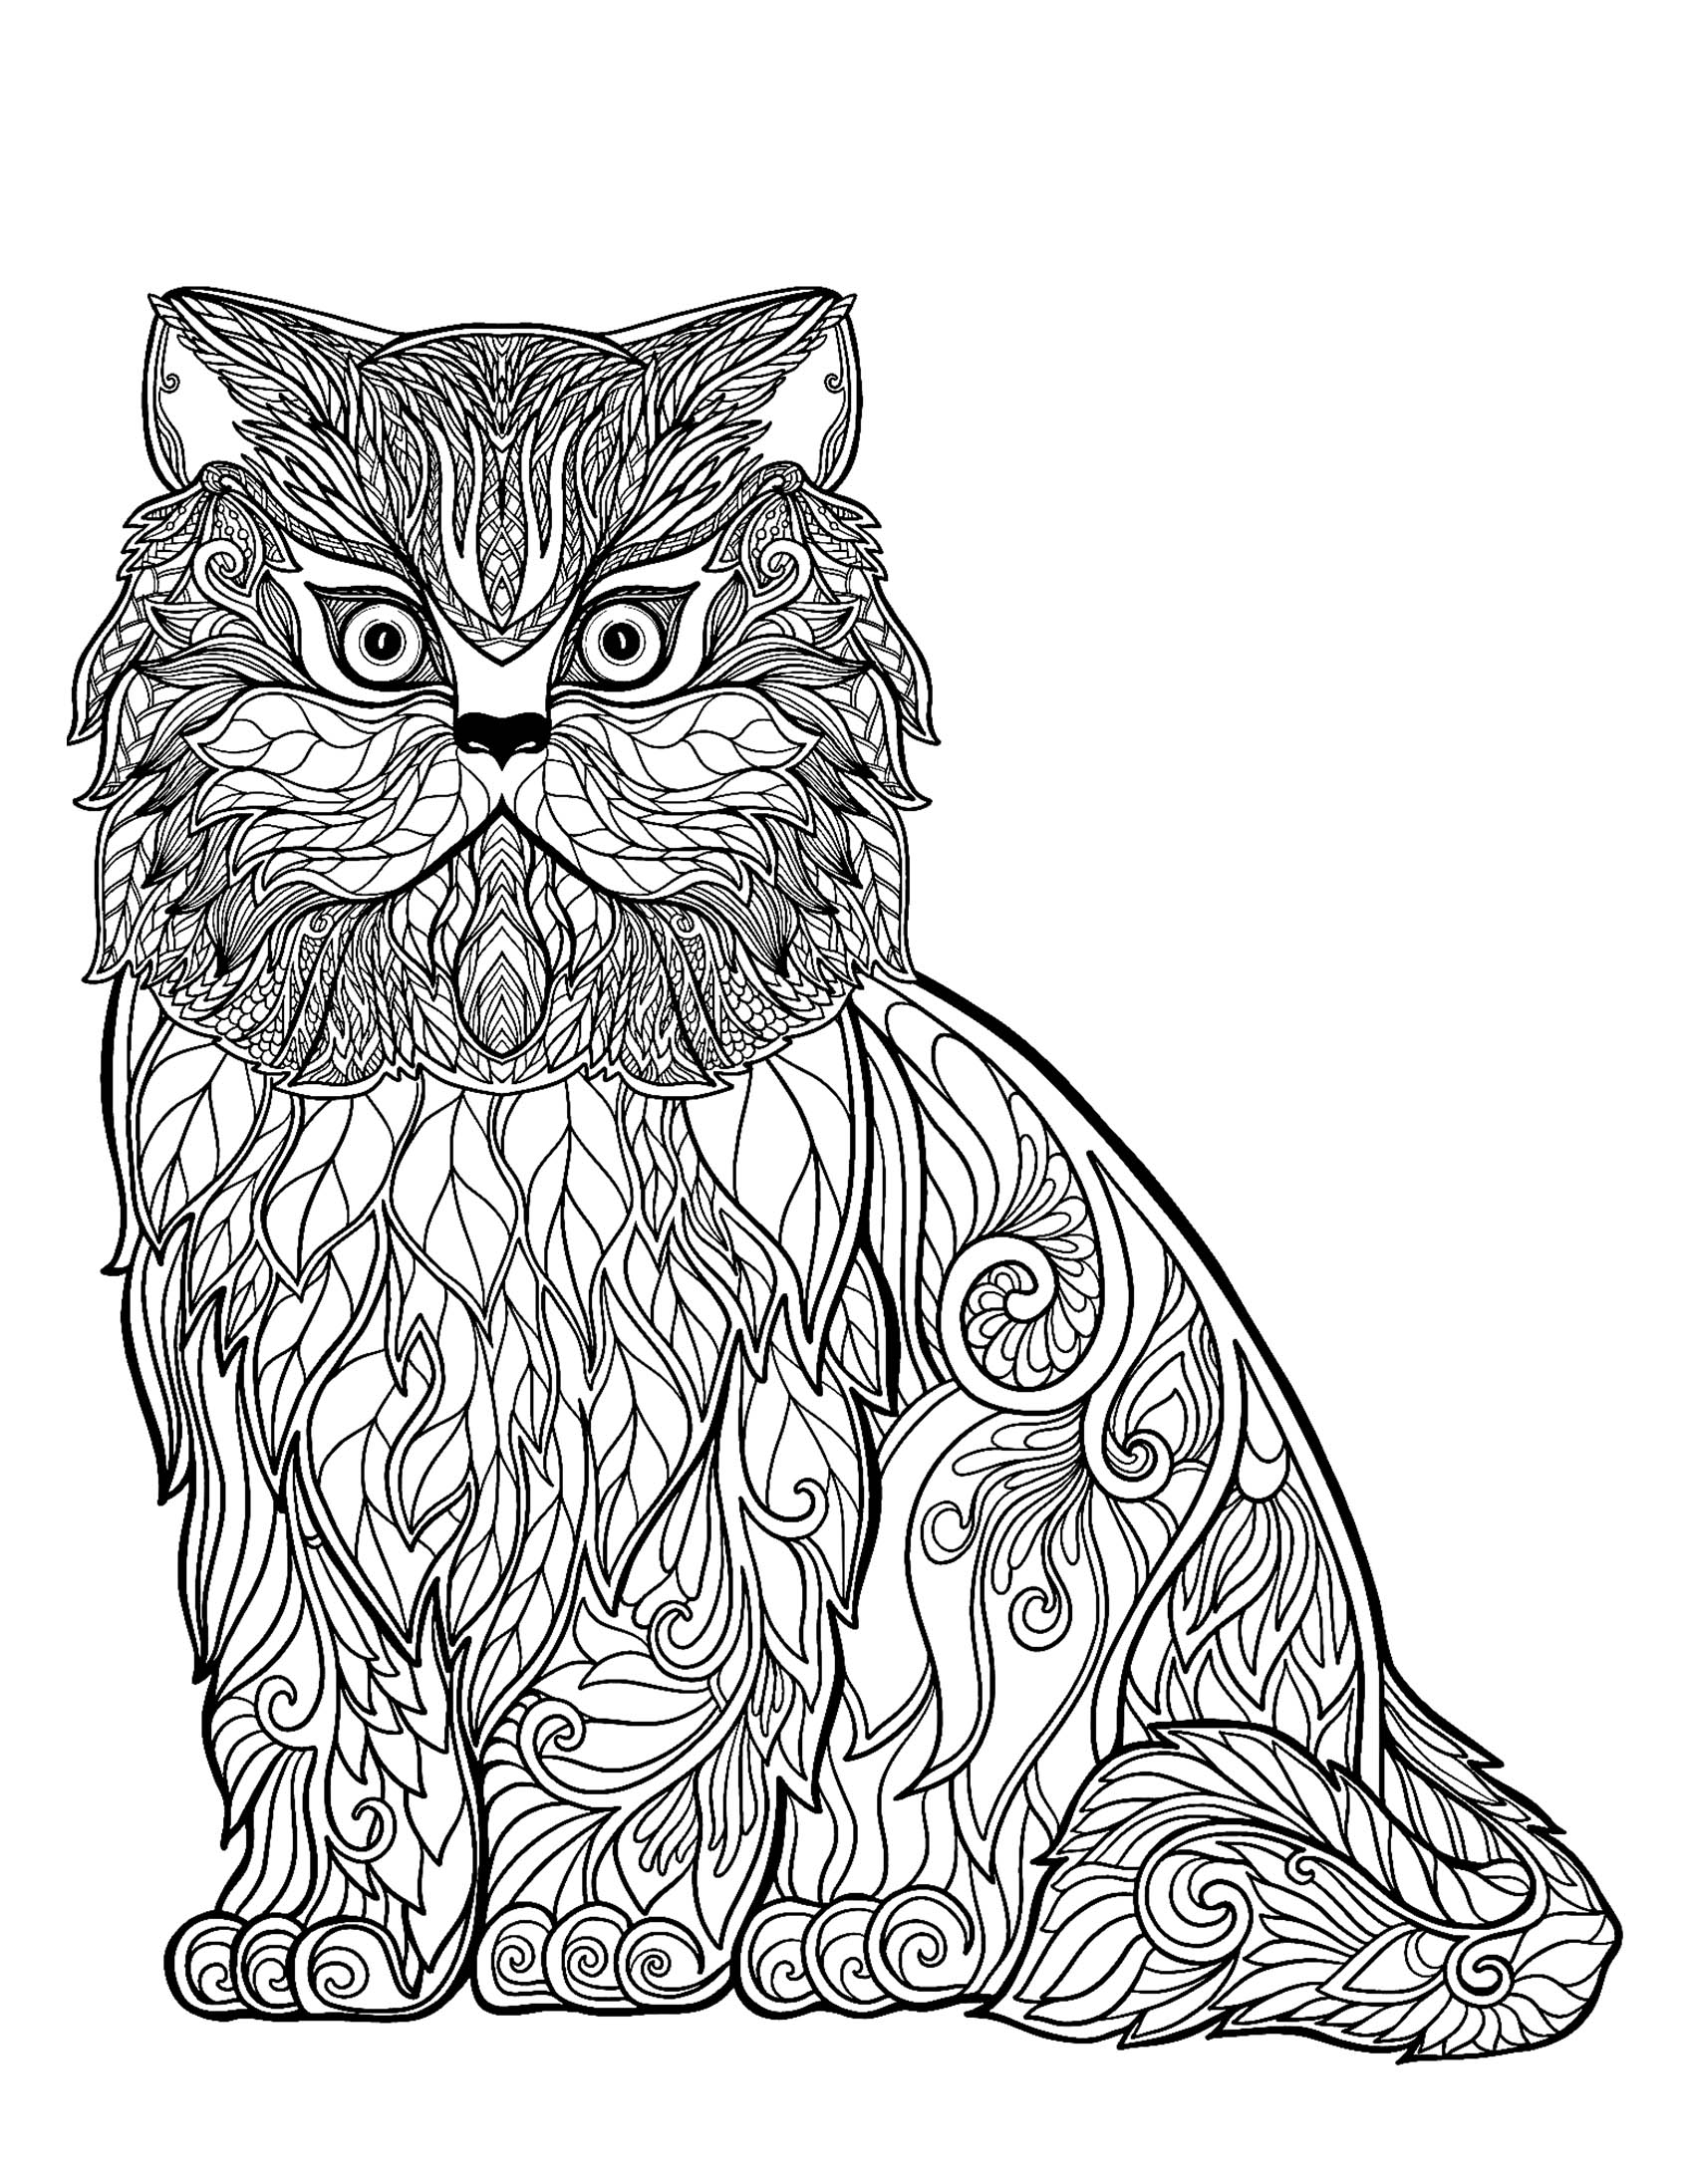 Download Cat free to color for kids : Wise cat full of details ...